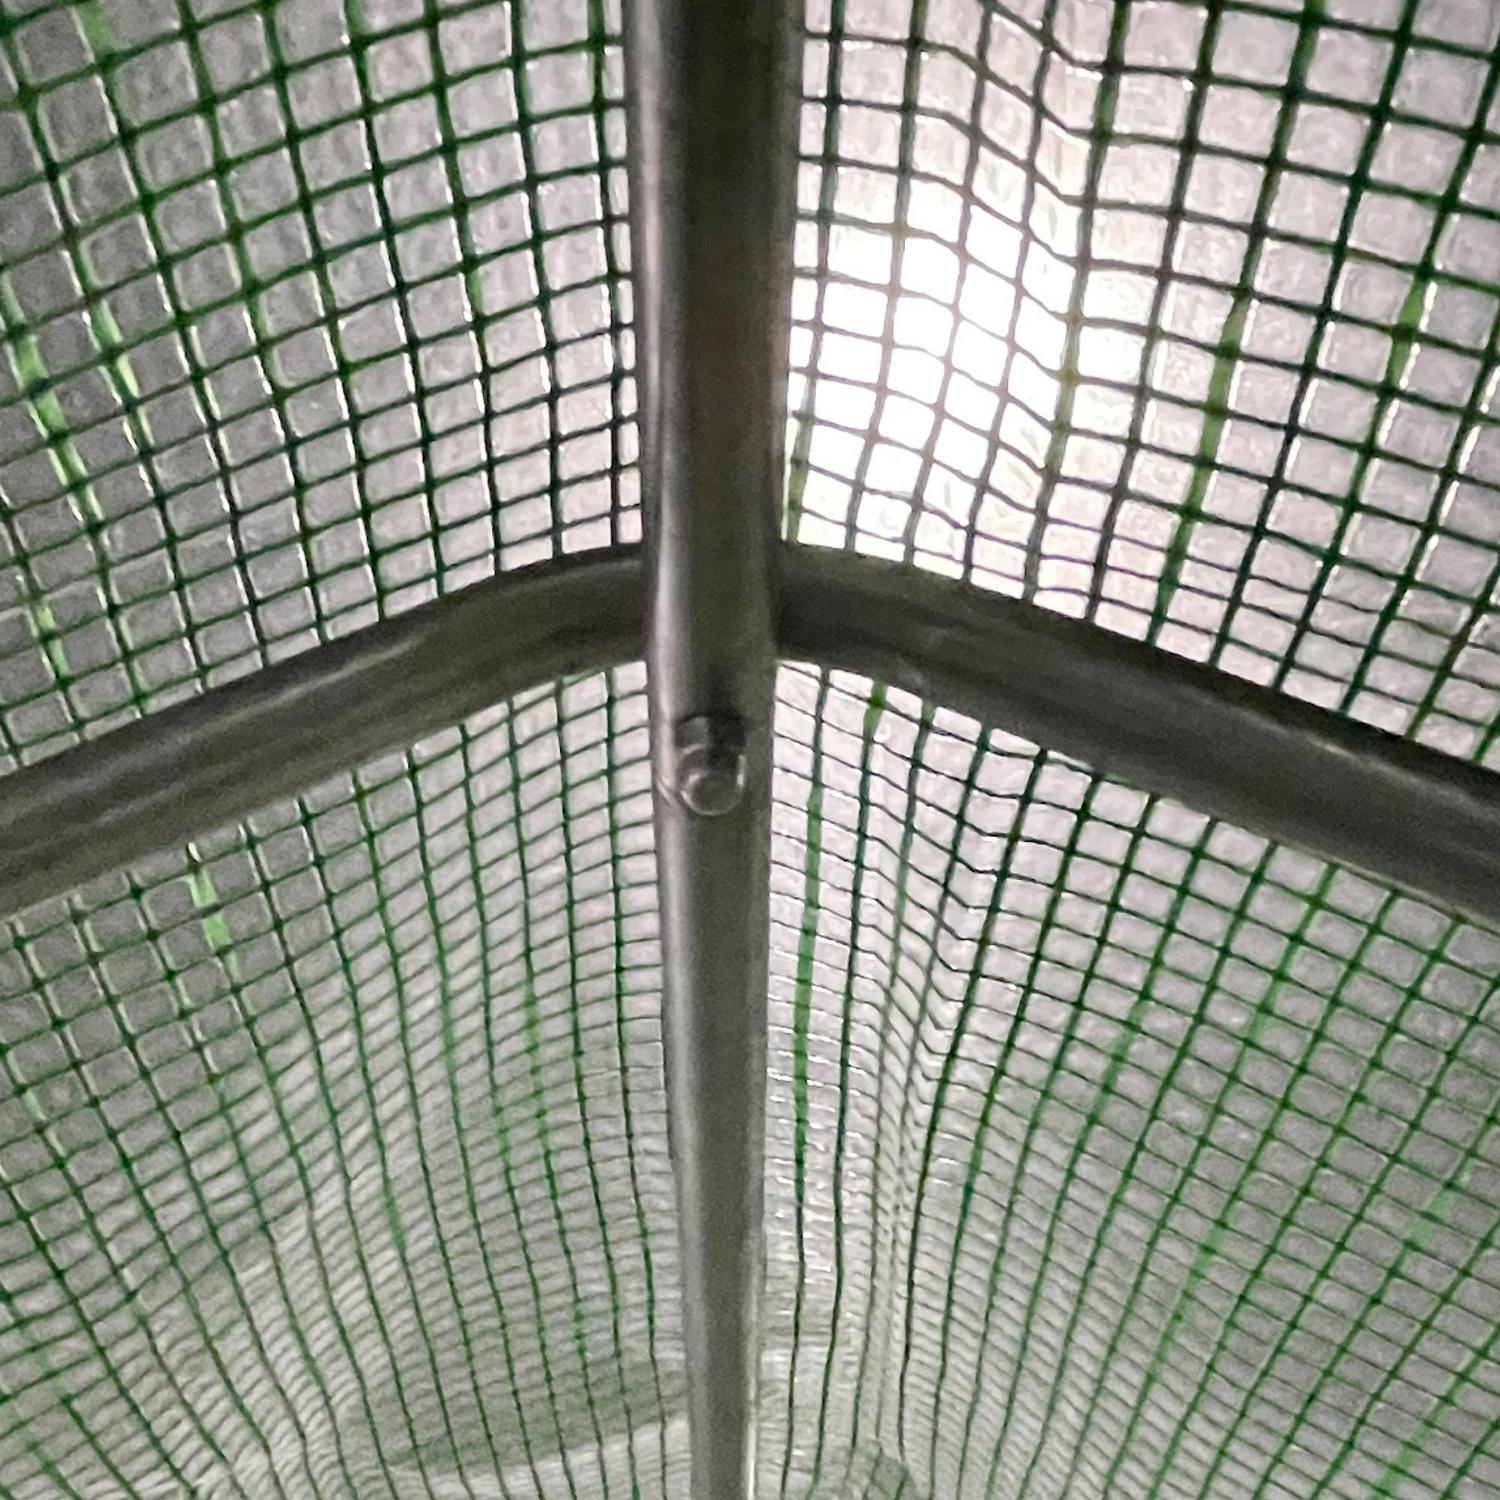 Walk-in Polytunnel Round / Gable Top Garden Greenhouse Heat Shed (4 X 2 X 2) M